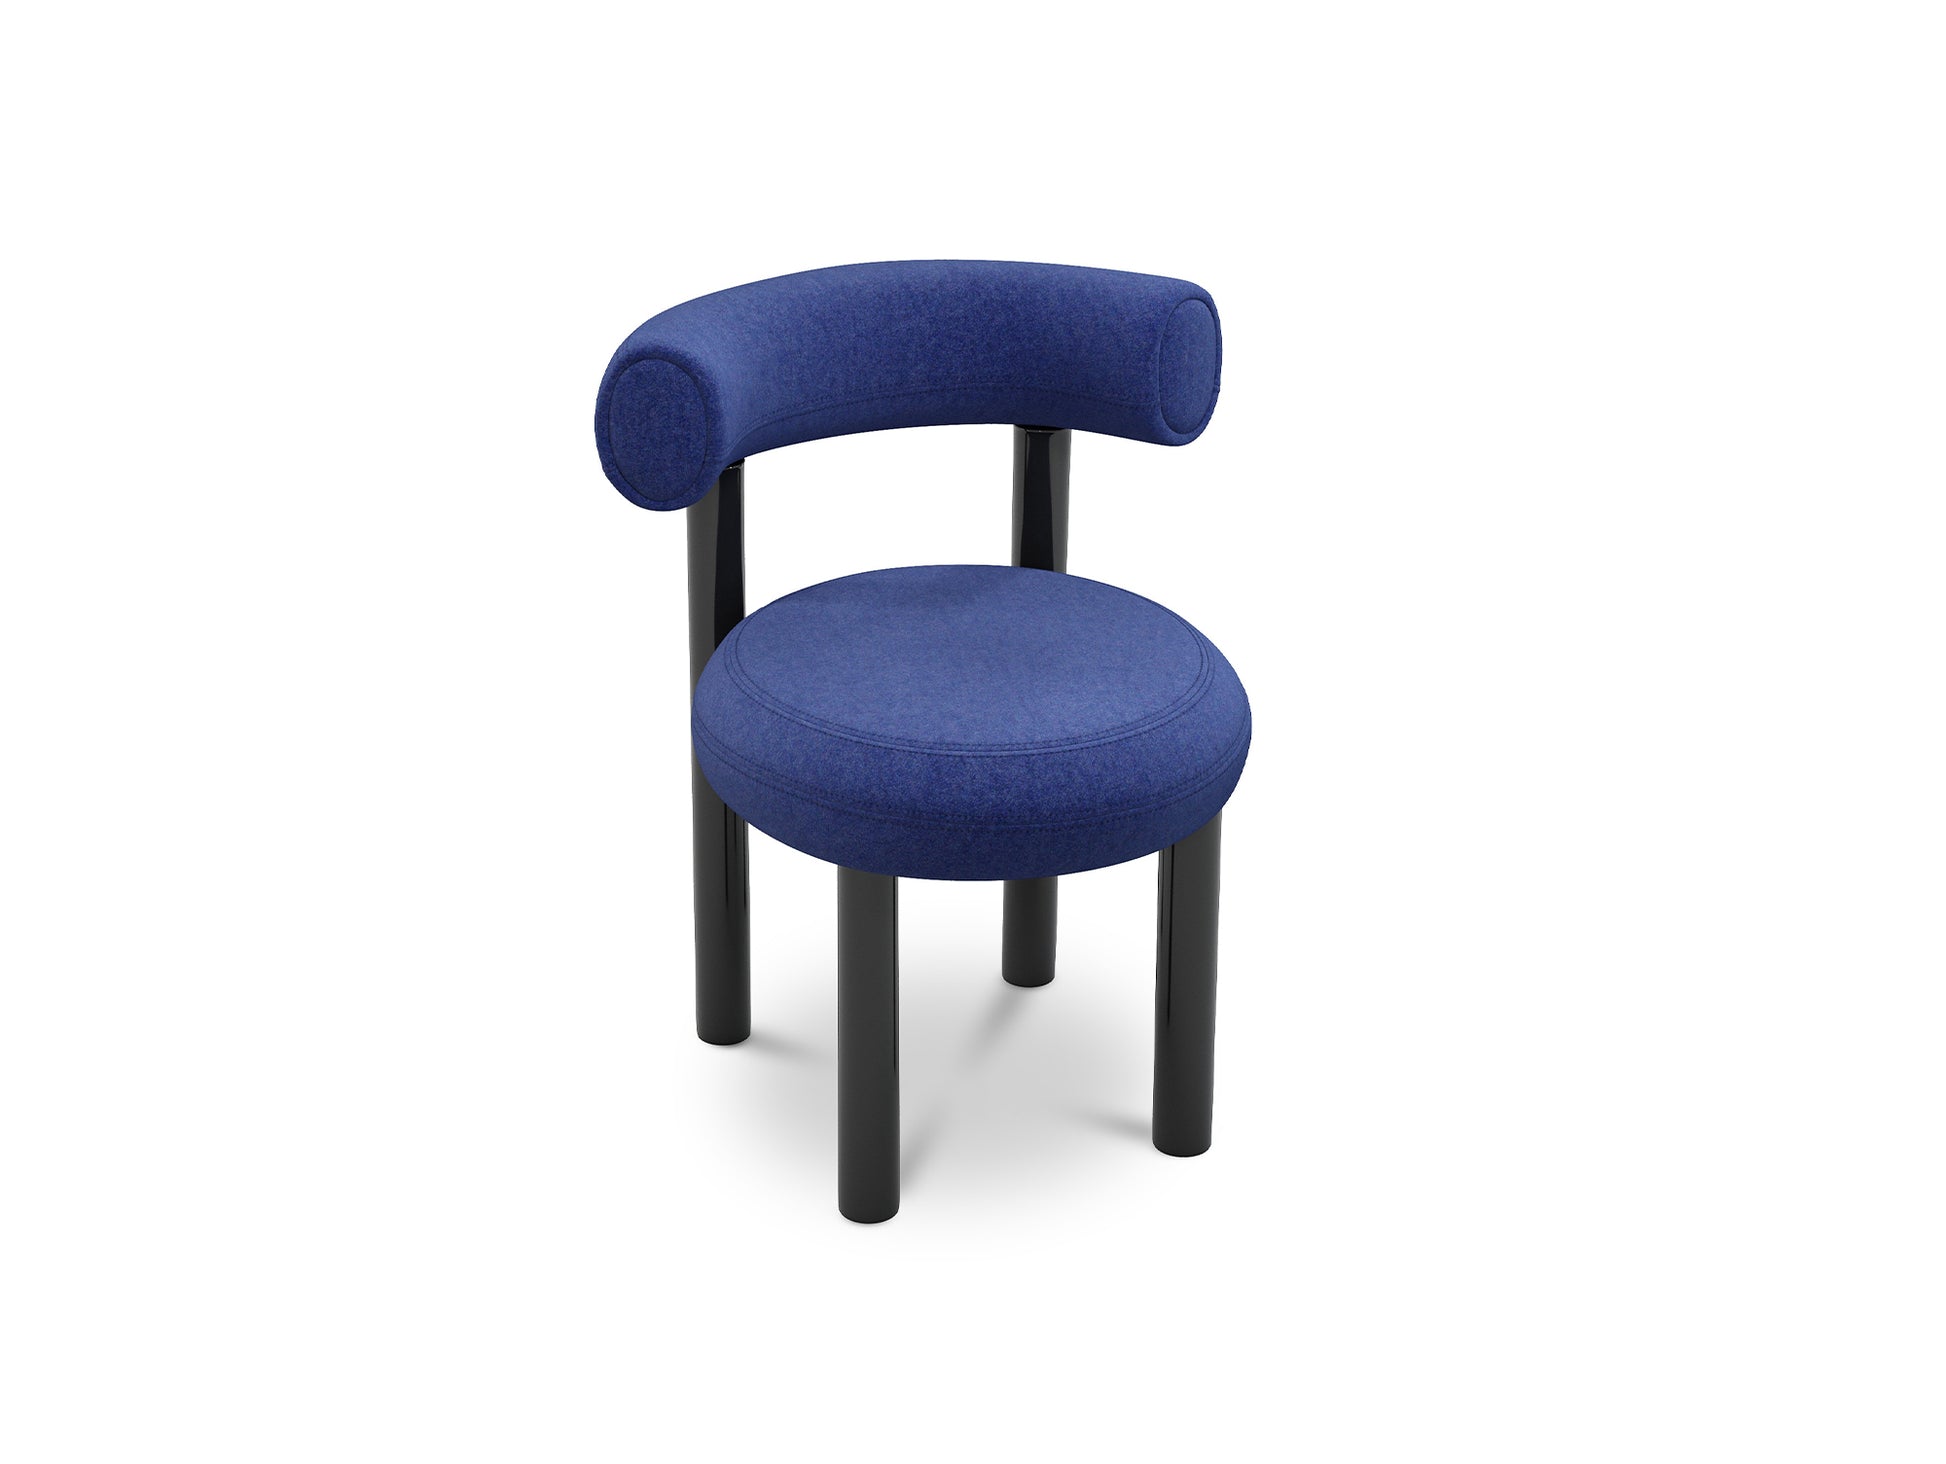 Fat Dining Chair by Tom Dixon - Melange Nap 771